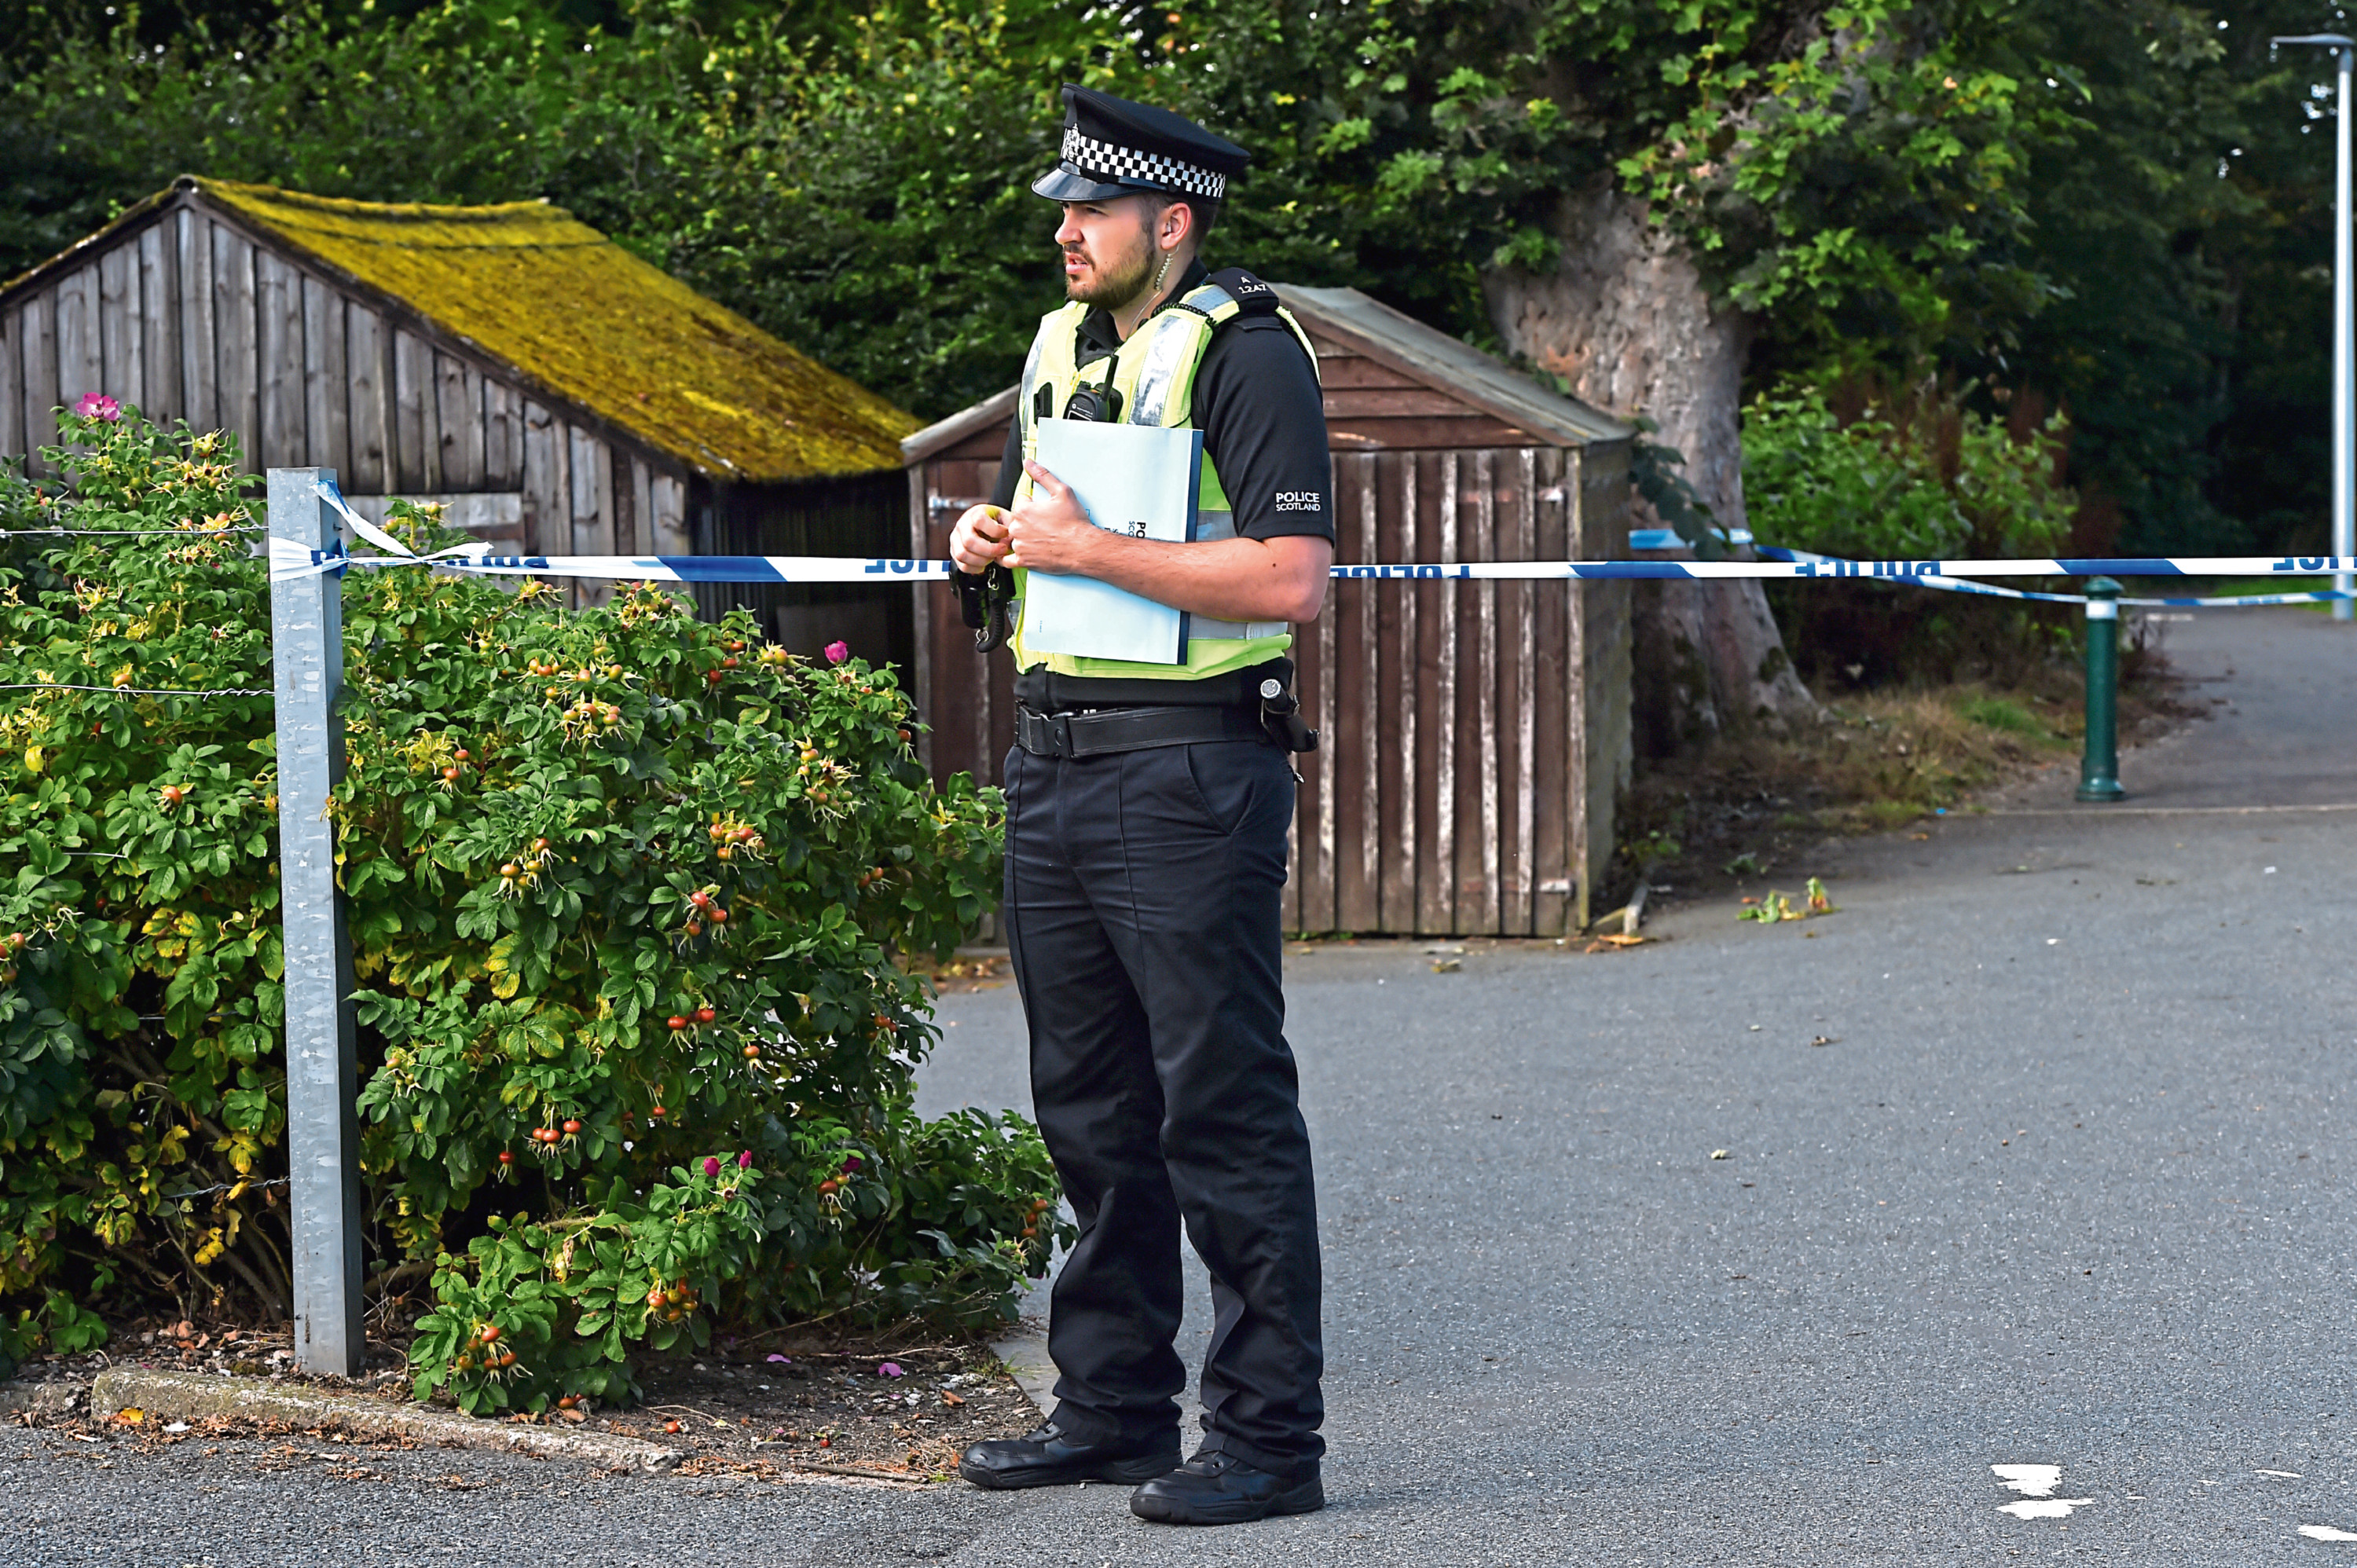 Family's anguish as man’s body ‘dumped beside sheds’ in 